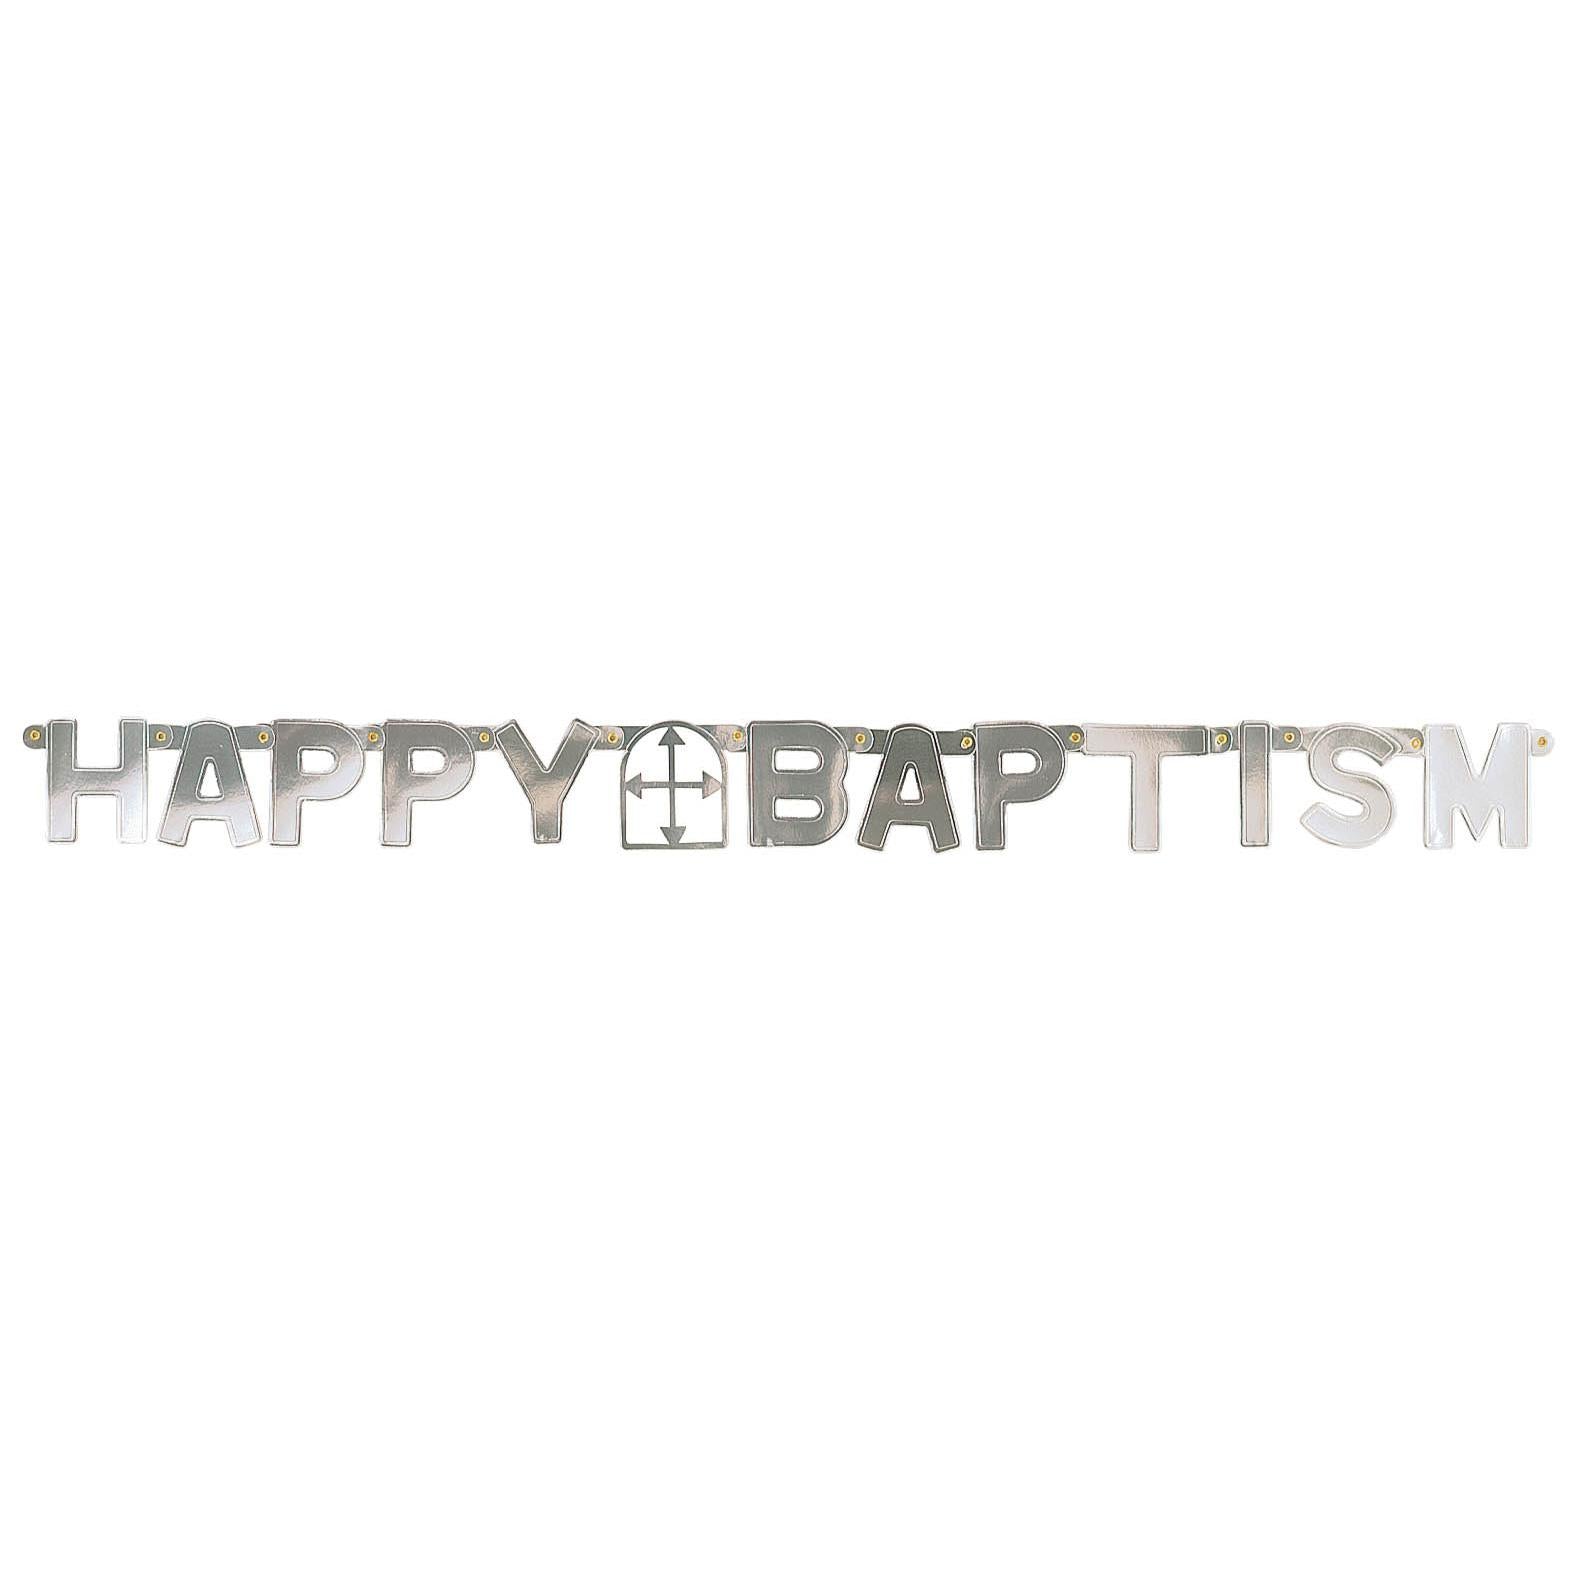 Happy Baptism Silver Letter Banner Decorations - Party Centre